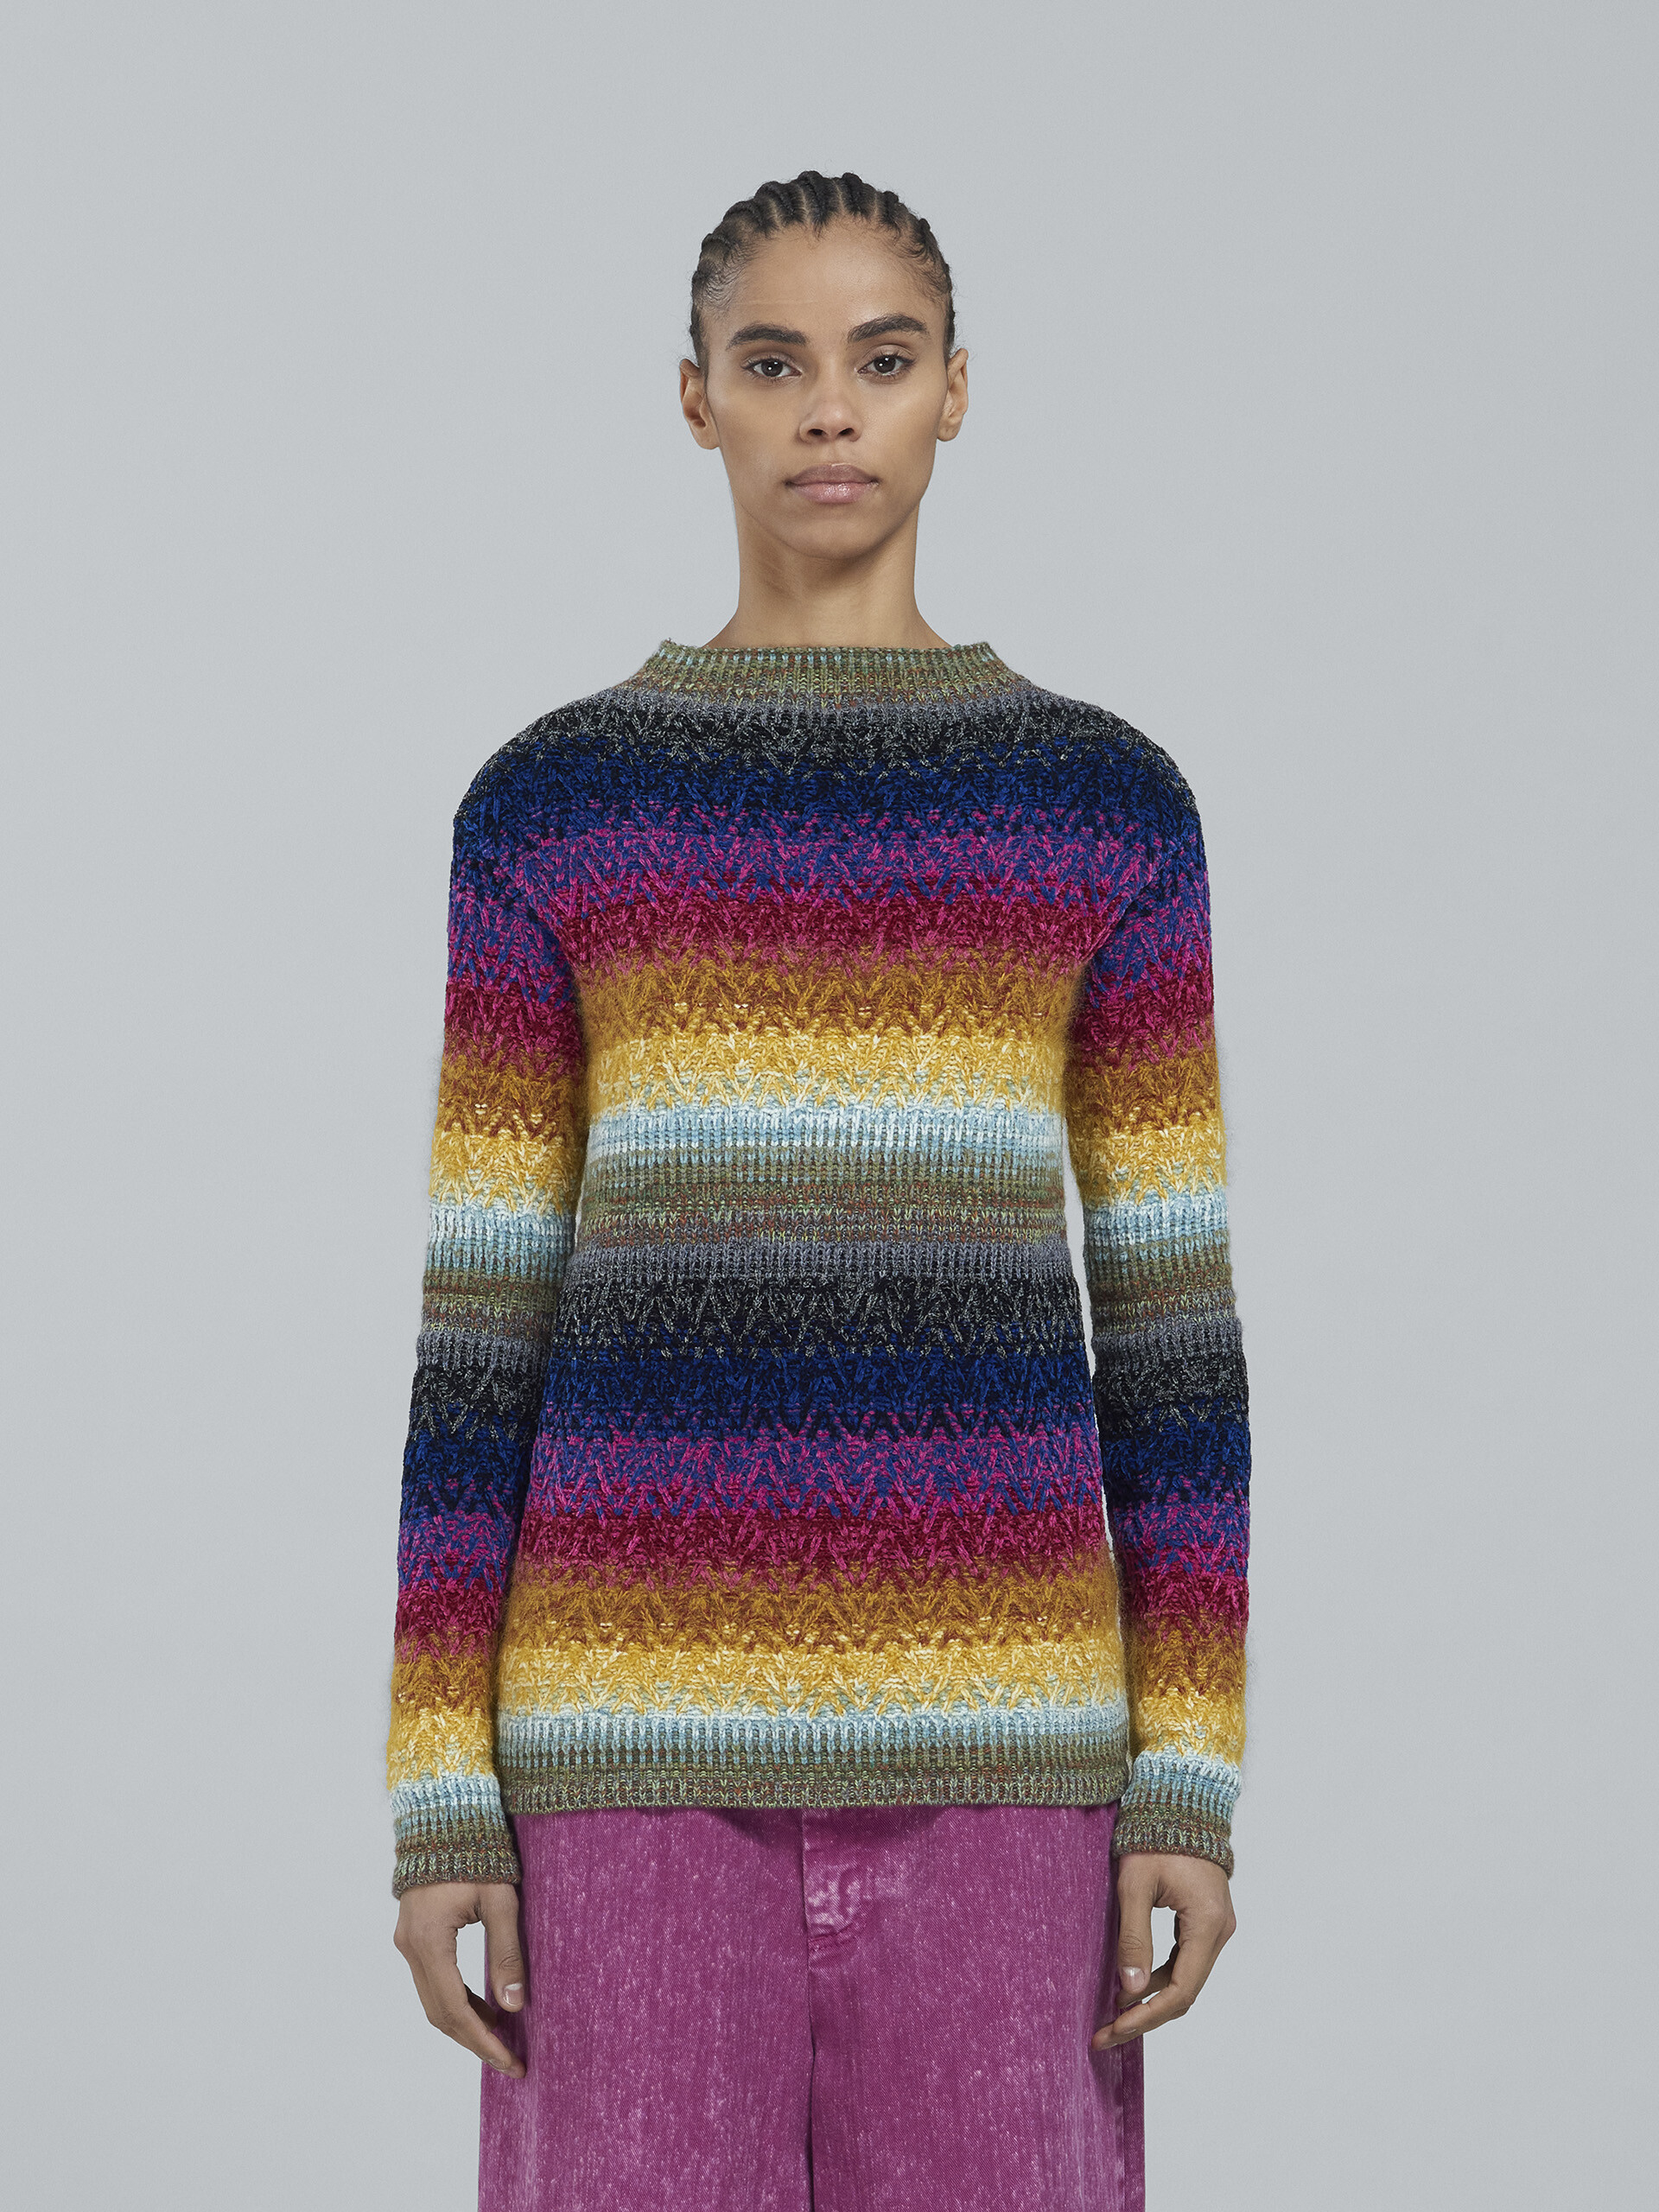 Viscose cotton and wool sweater - Pullovers - Image 2